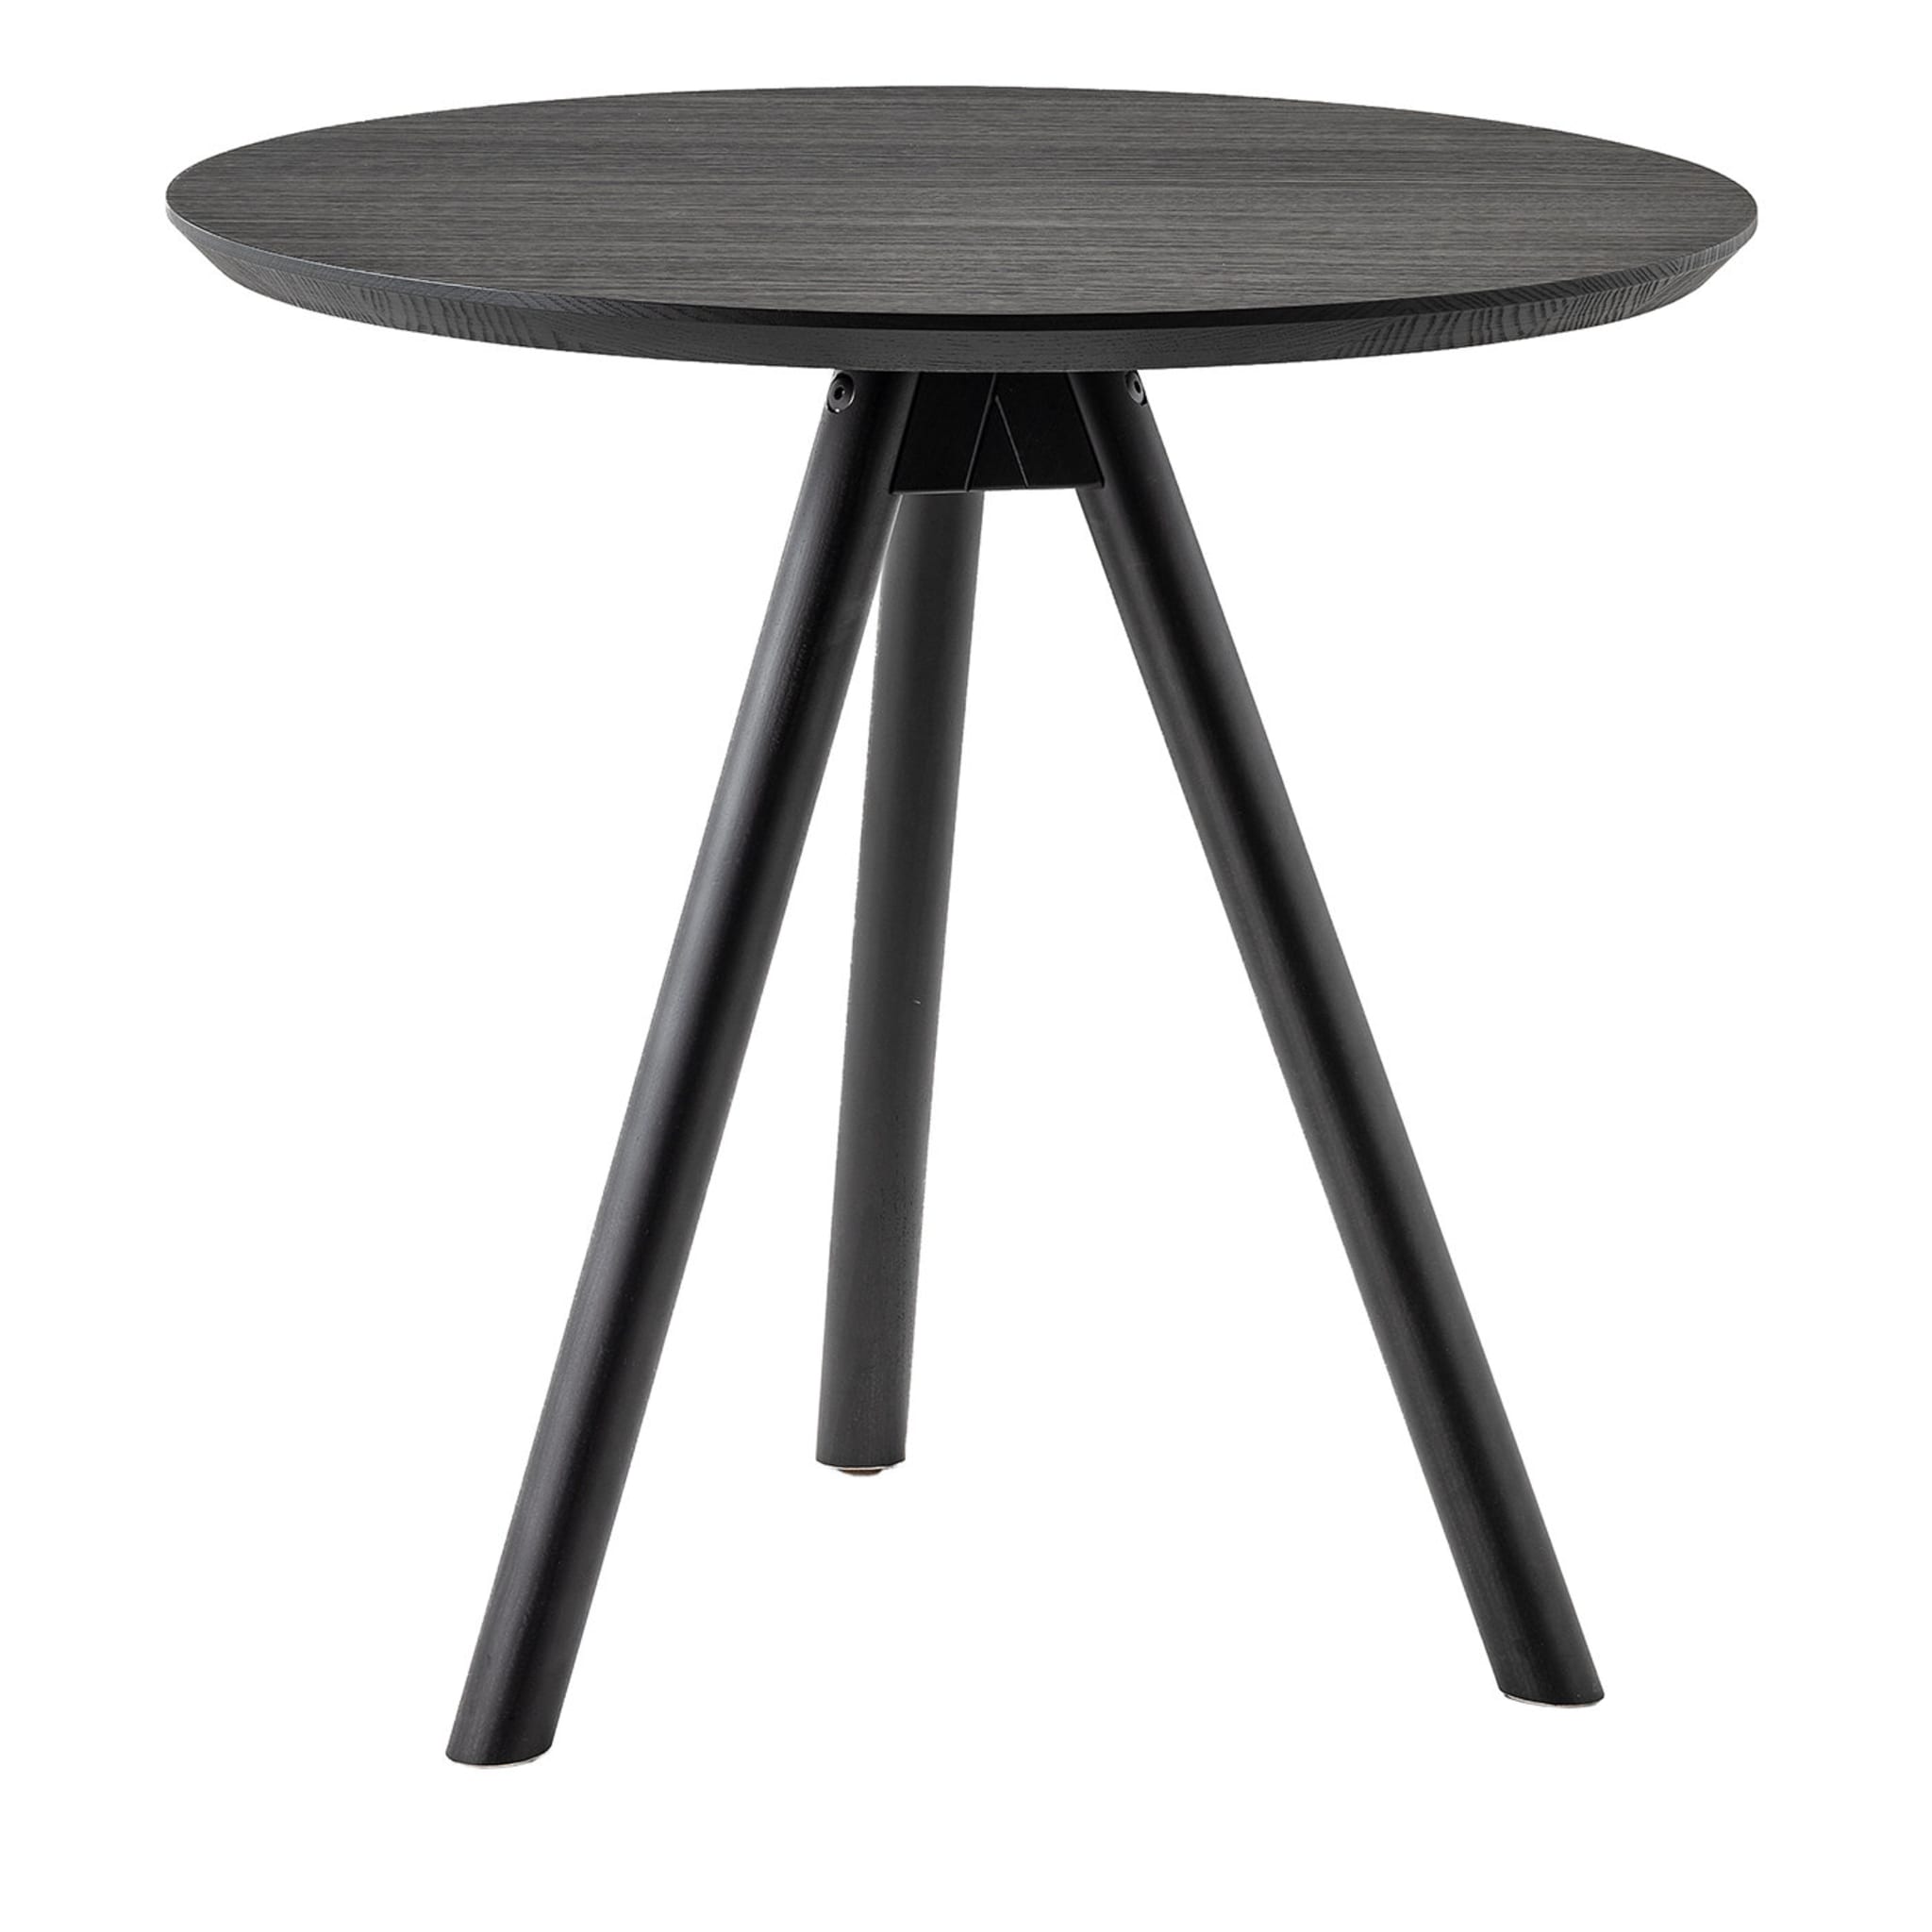 Aky Contract Black Round Tripod Side Table by Emilio Nanni - Main view